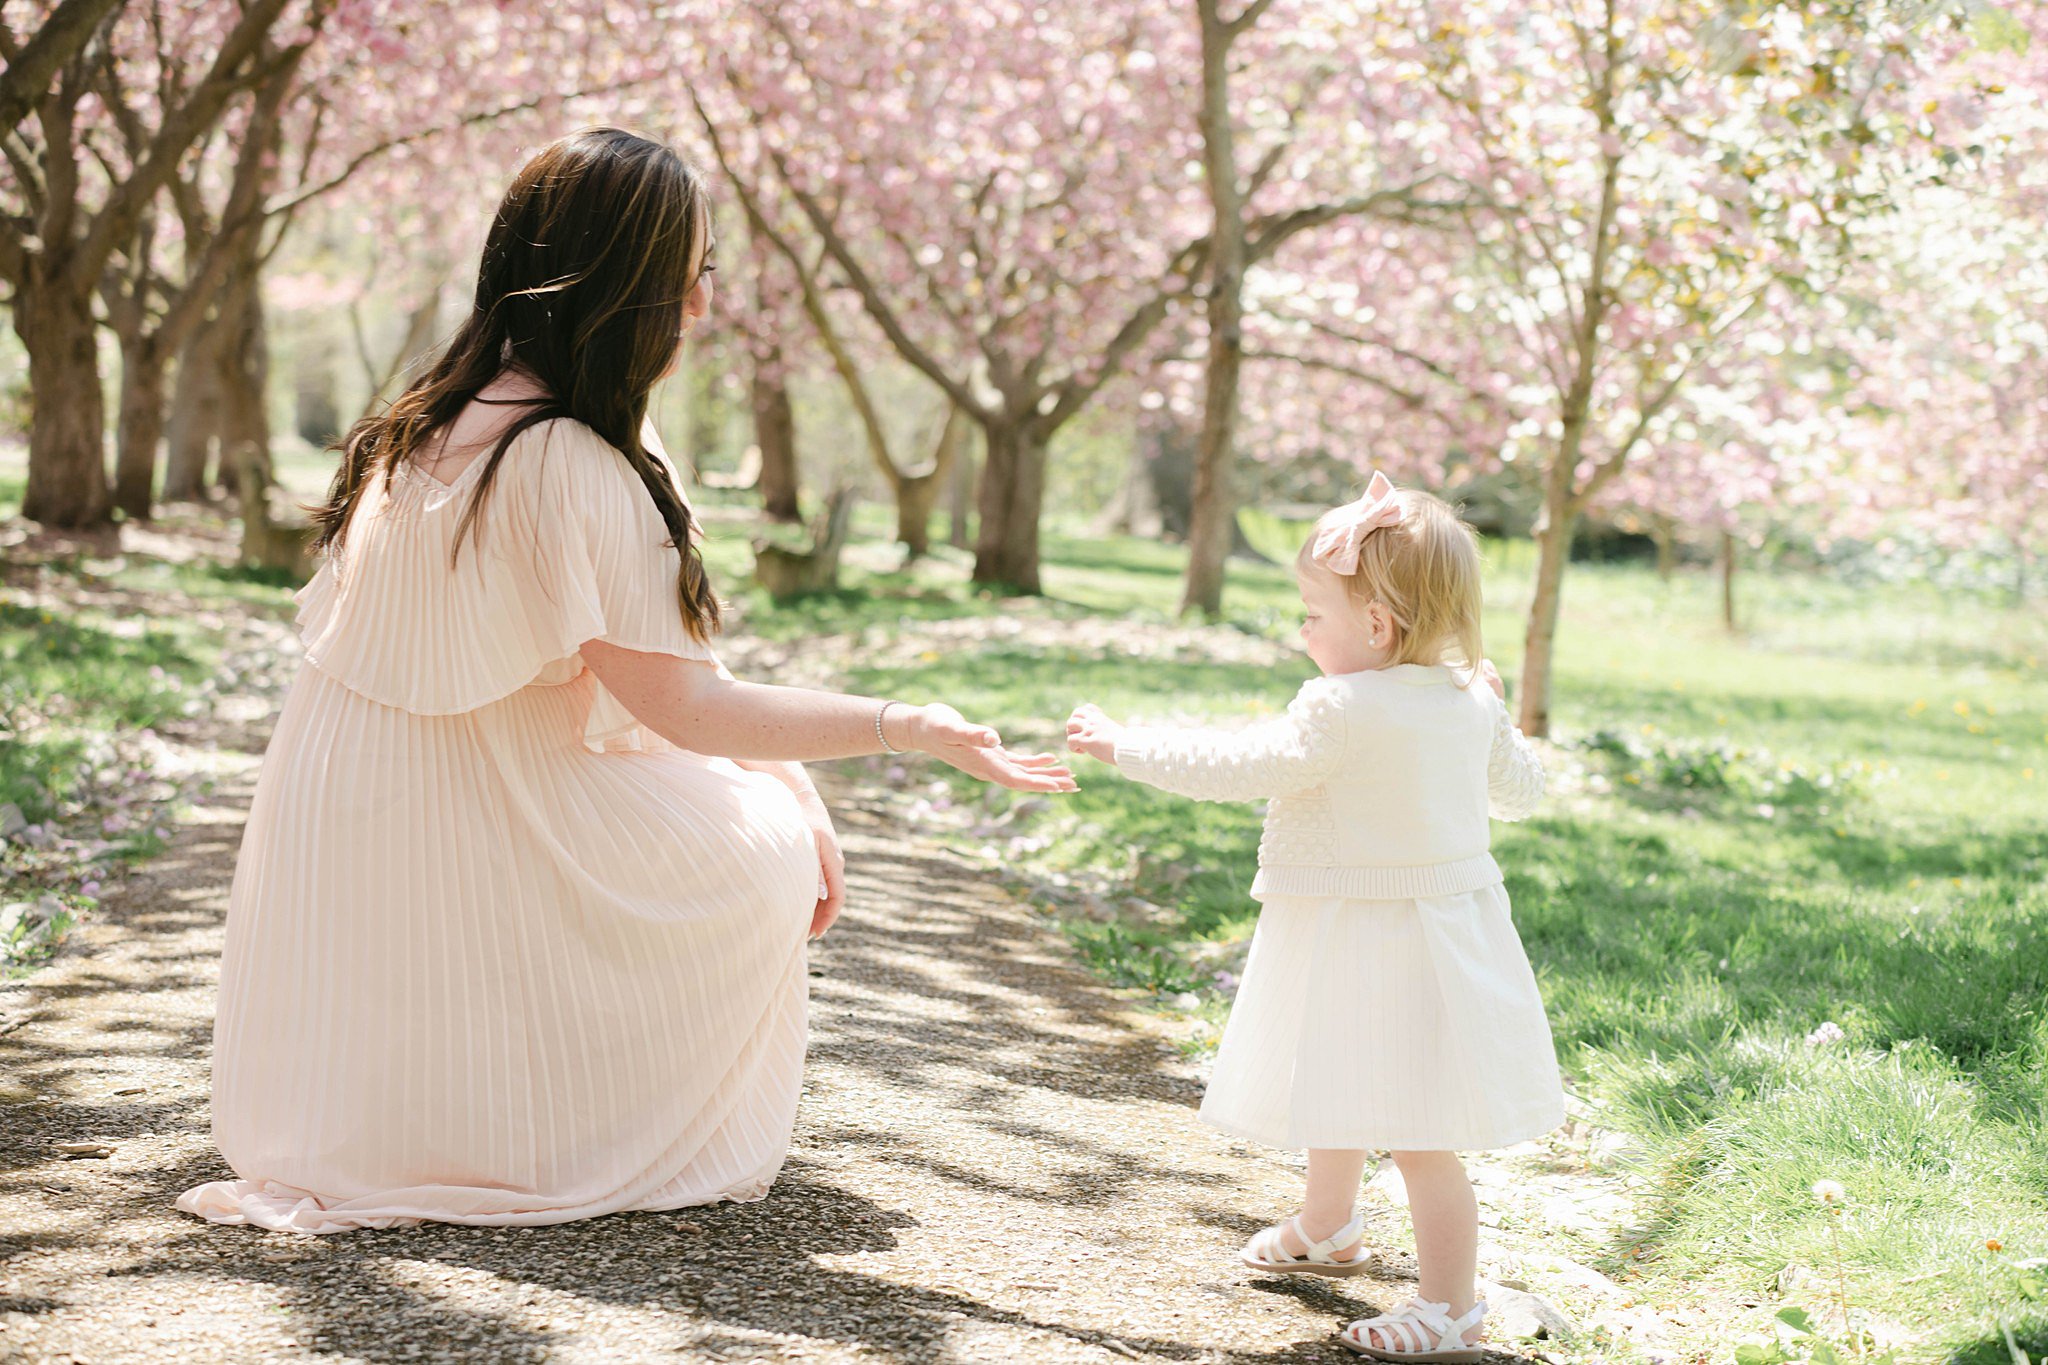 A mother and her young daughter play in a park path